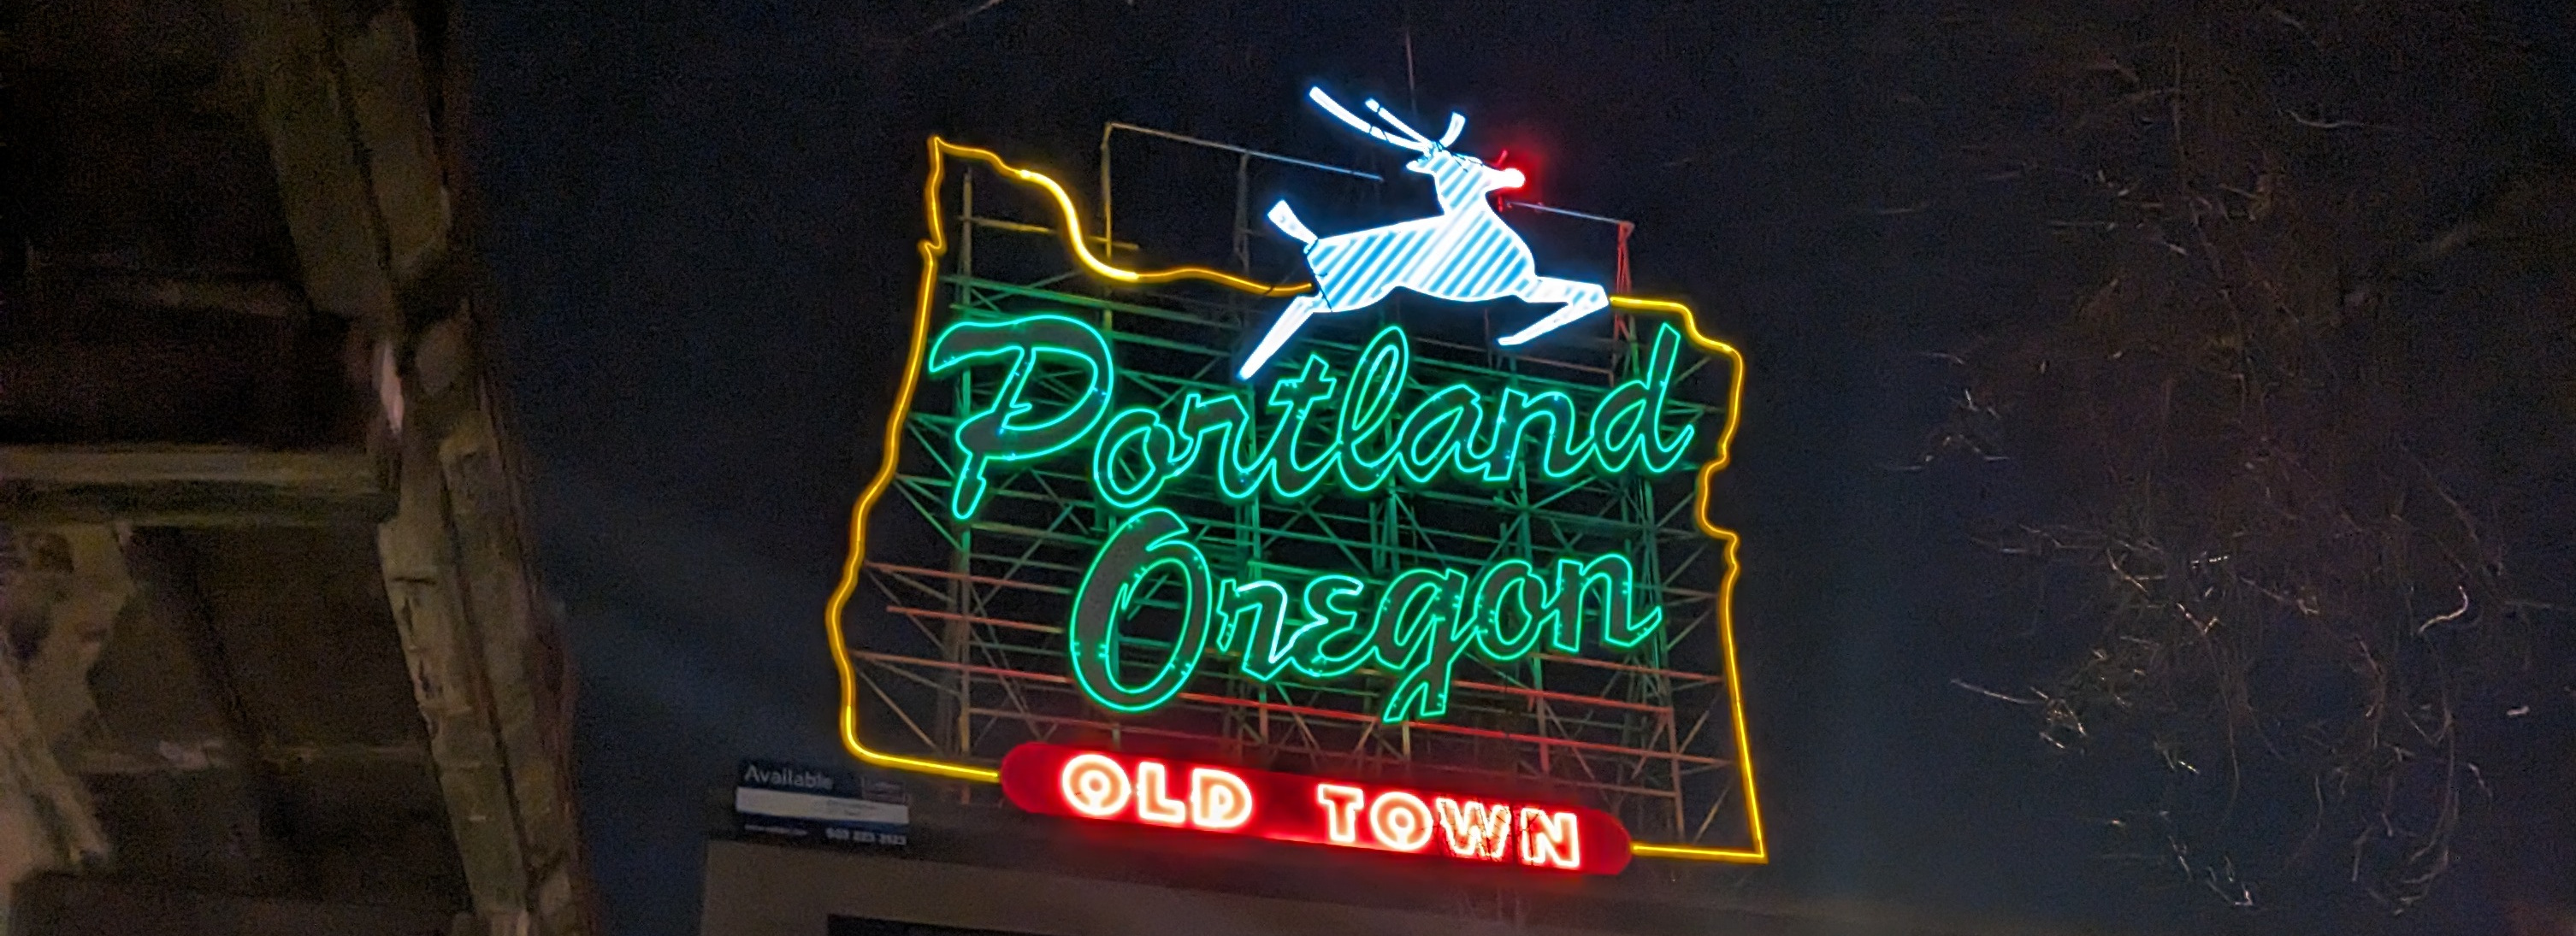 The Portland 'White Stag' sign, lit up with a red nose for the holiday.